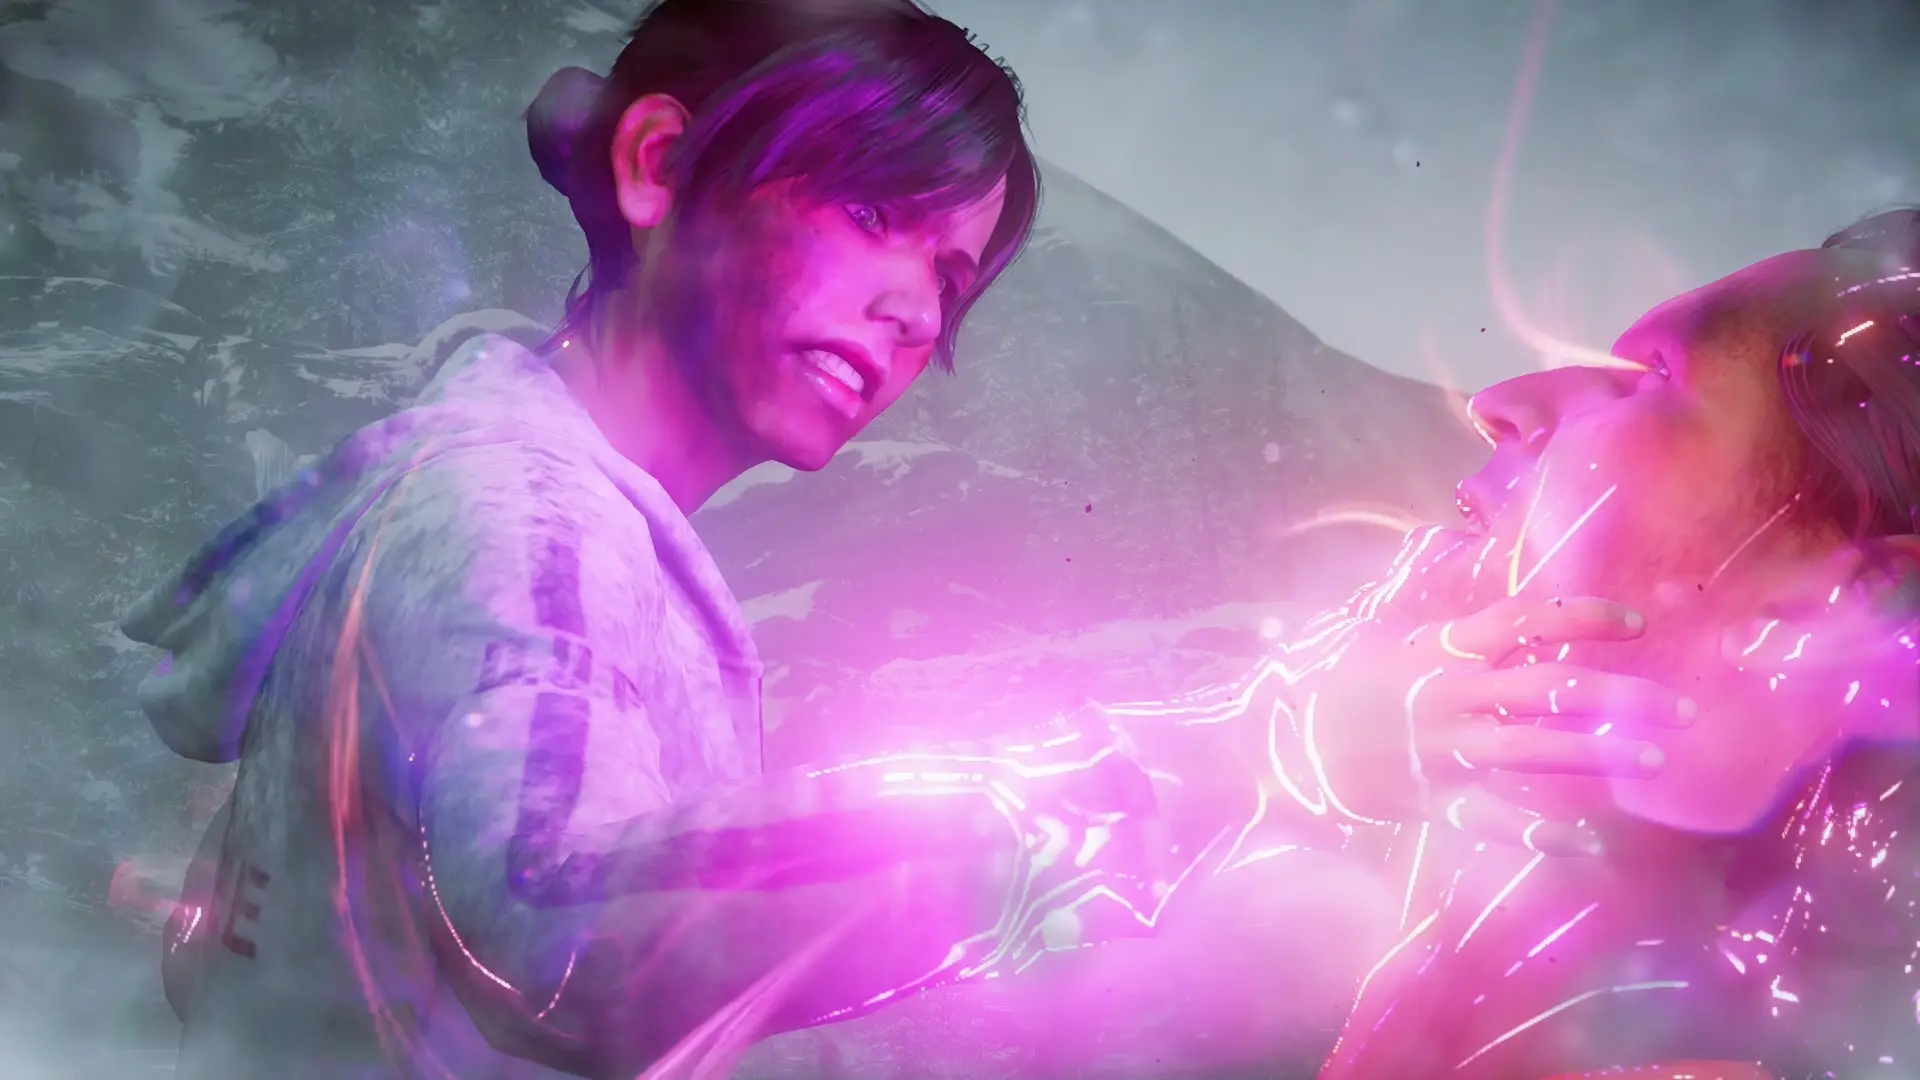 Fetch first. Infamous: first Light. Проныра first Light. Infamous 1. Infamous: первый свет 1.